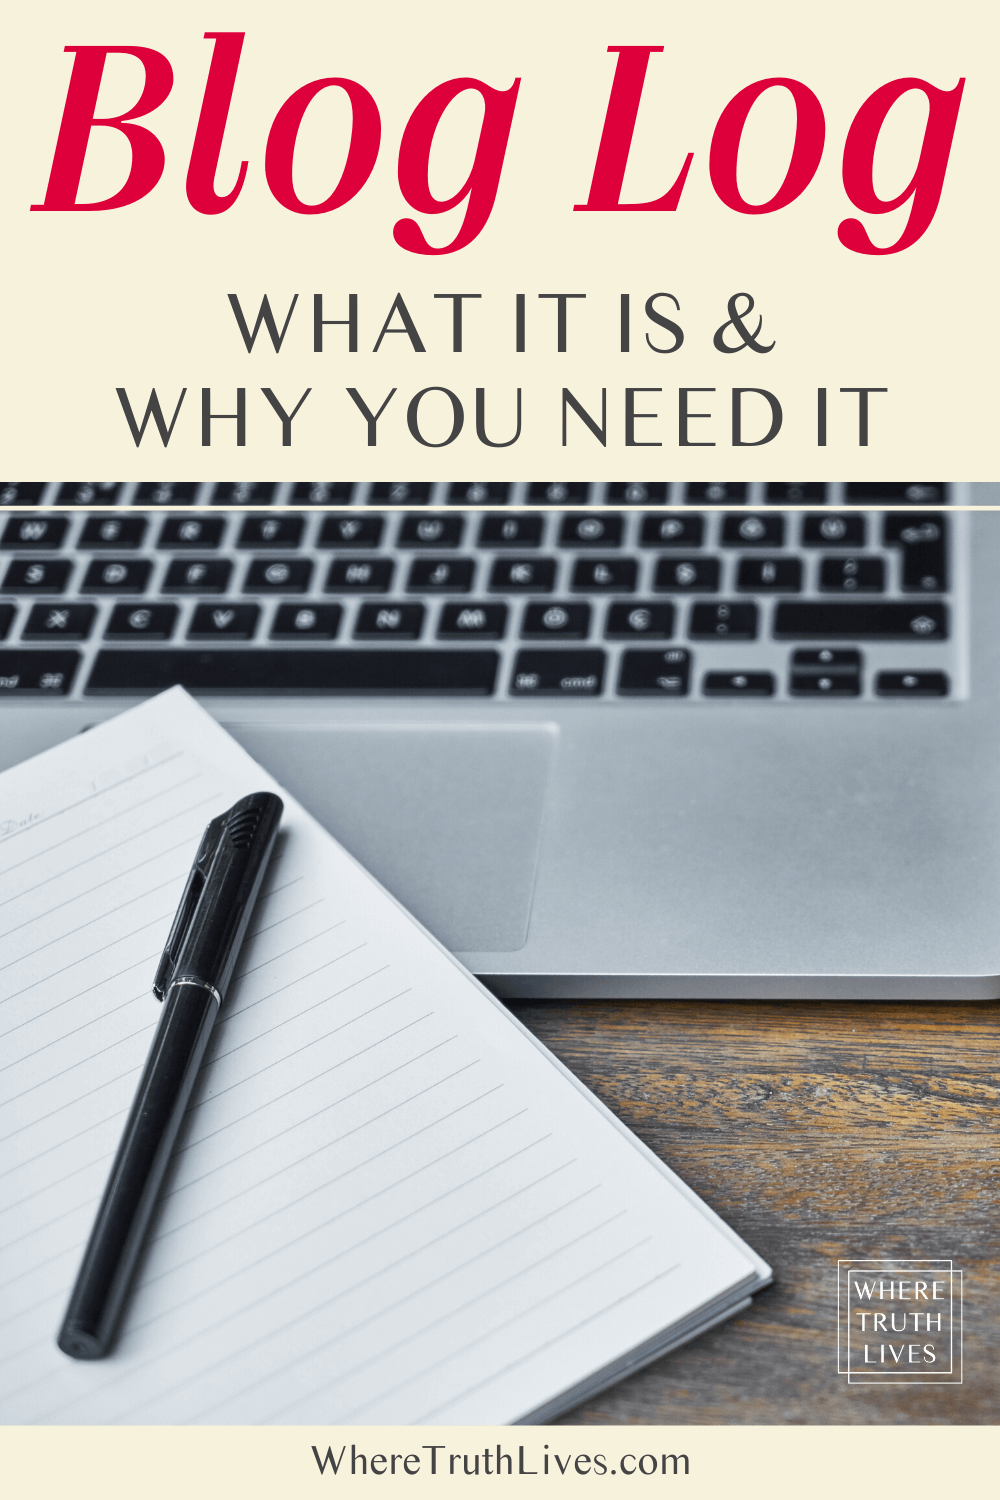 Find out what a blog log is and why it’s the one thing that will solve most of your blogging struggles (plus, get your own free printable blog log)... | What a Blog Log Is (and Why You Need One!) | Where Truth Lives .com | Christian blog post | blogging, blogger, organization, organized